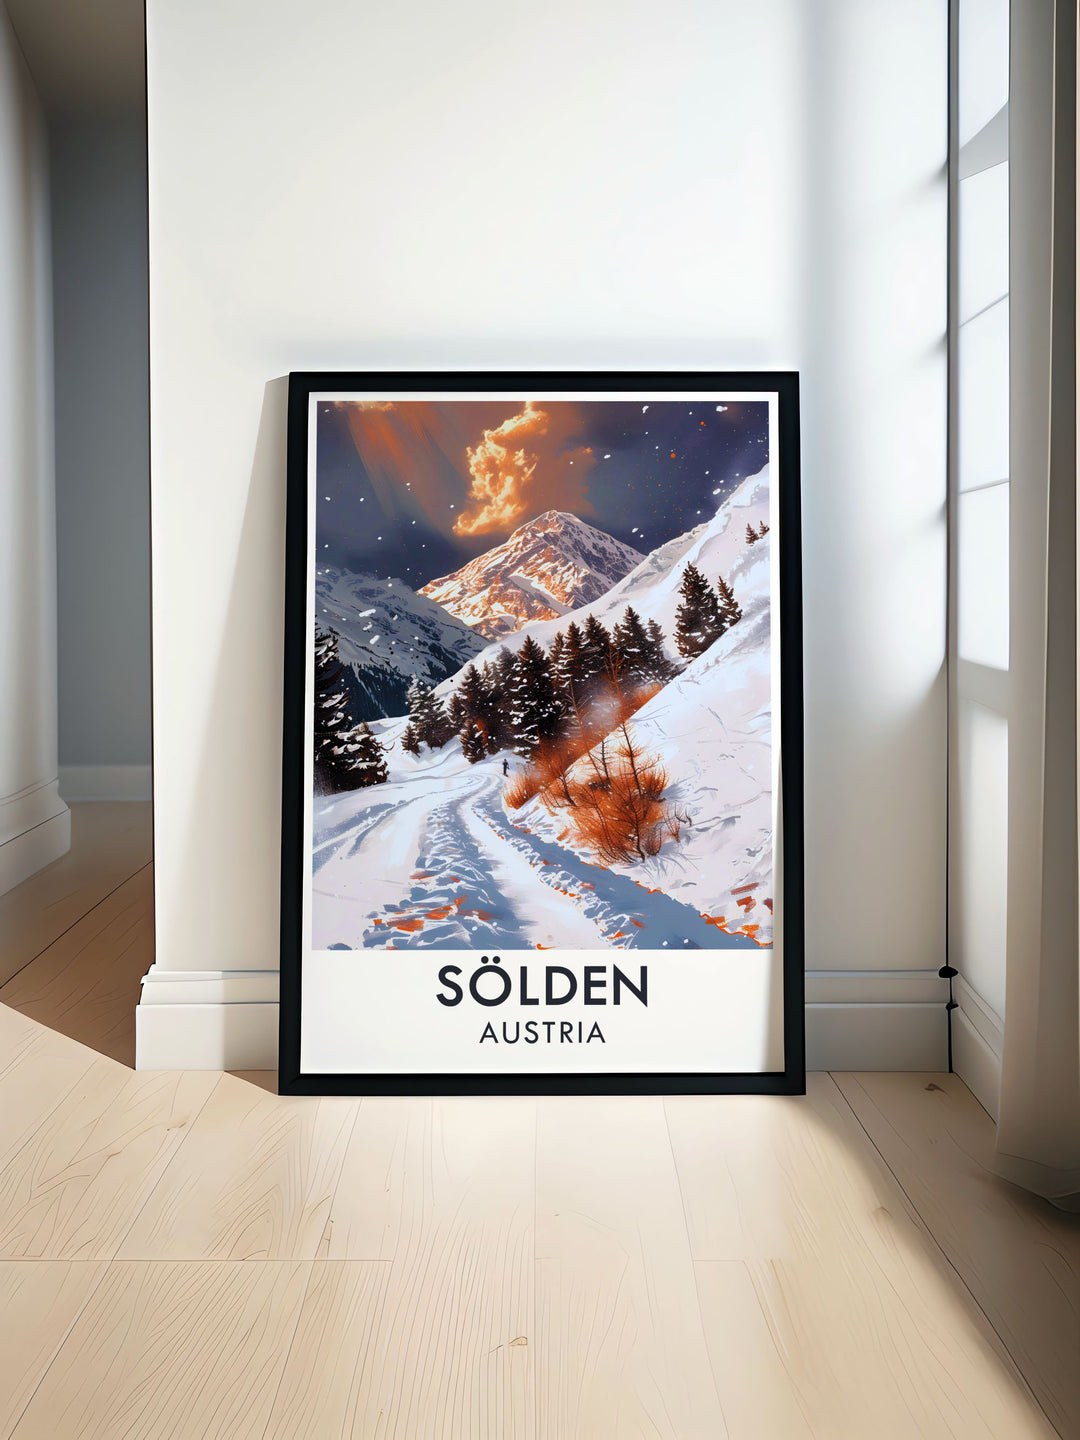 This poster of Solden captures the breathtaking mountain scenery and vibrant energy of the ski resort and glacier, inviting viewers to experience the unique charm and adventure of the Austrian Alps.